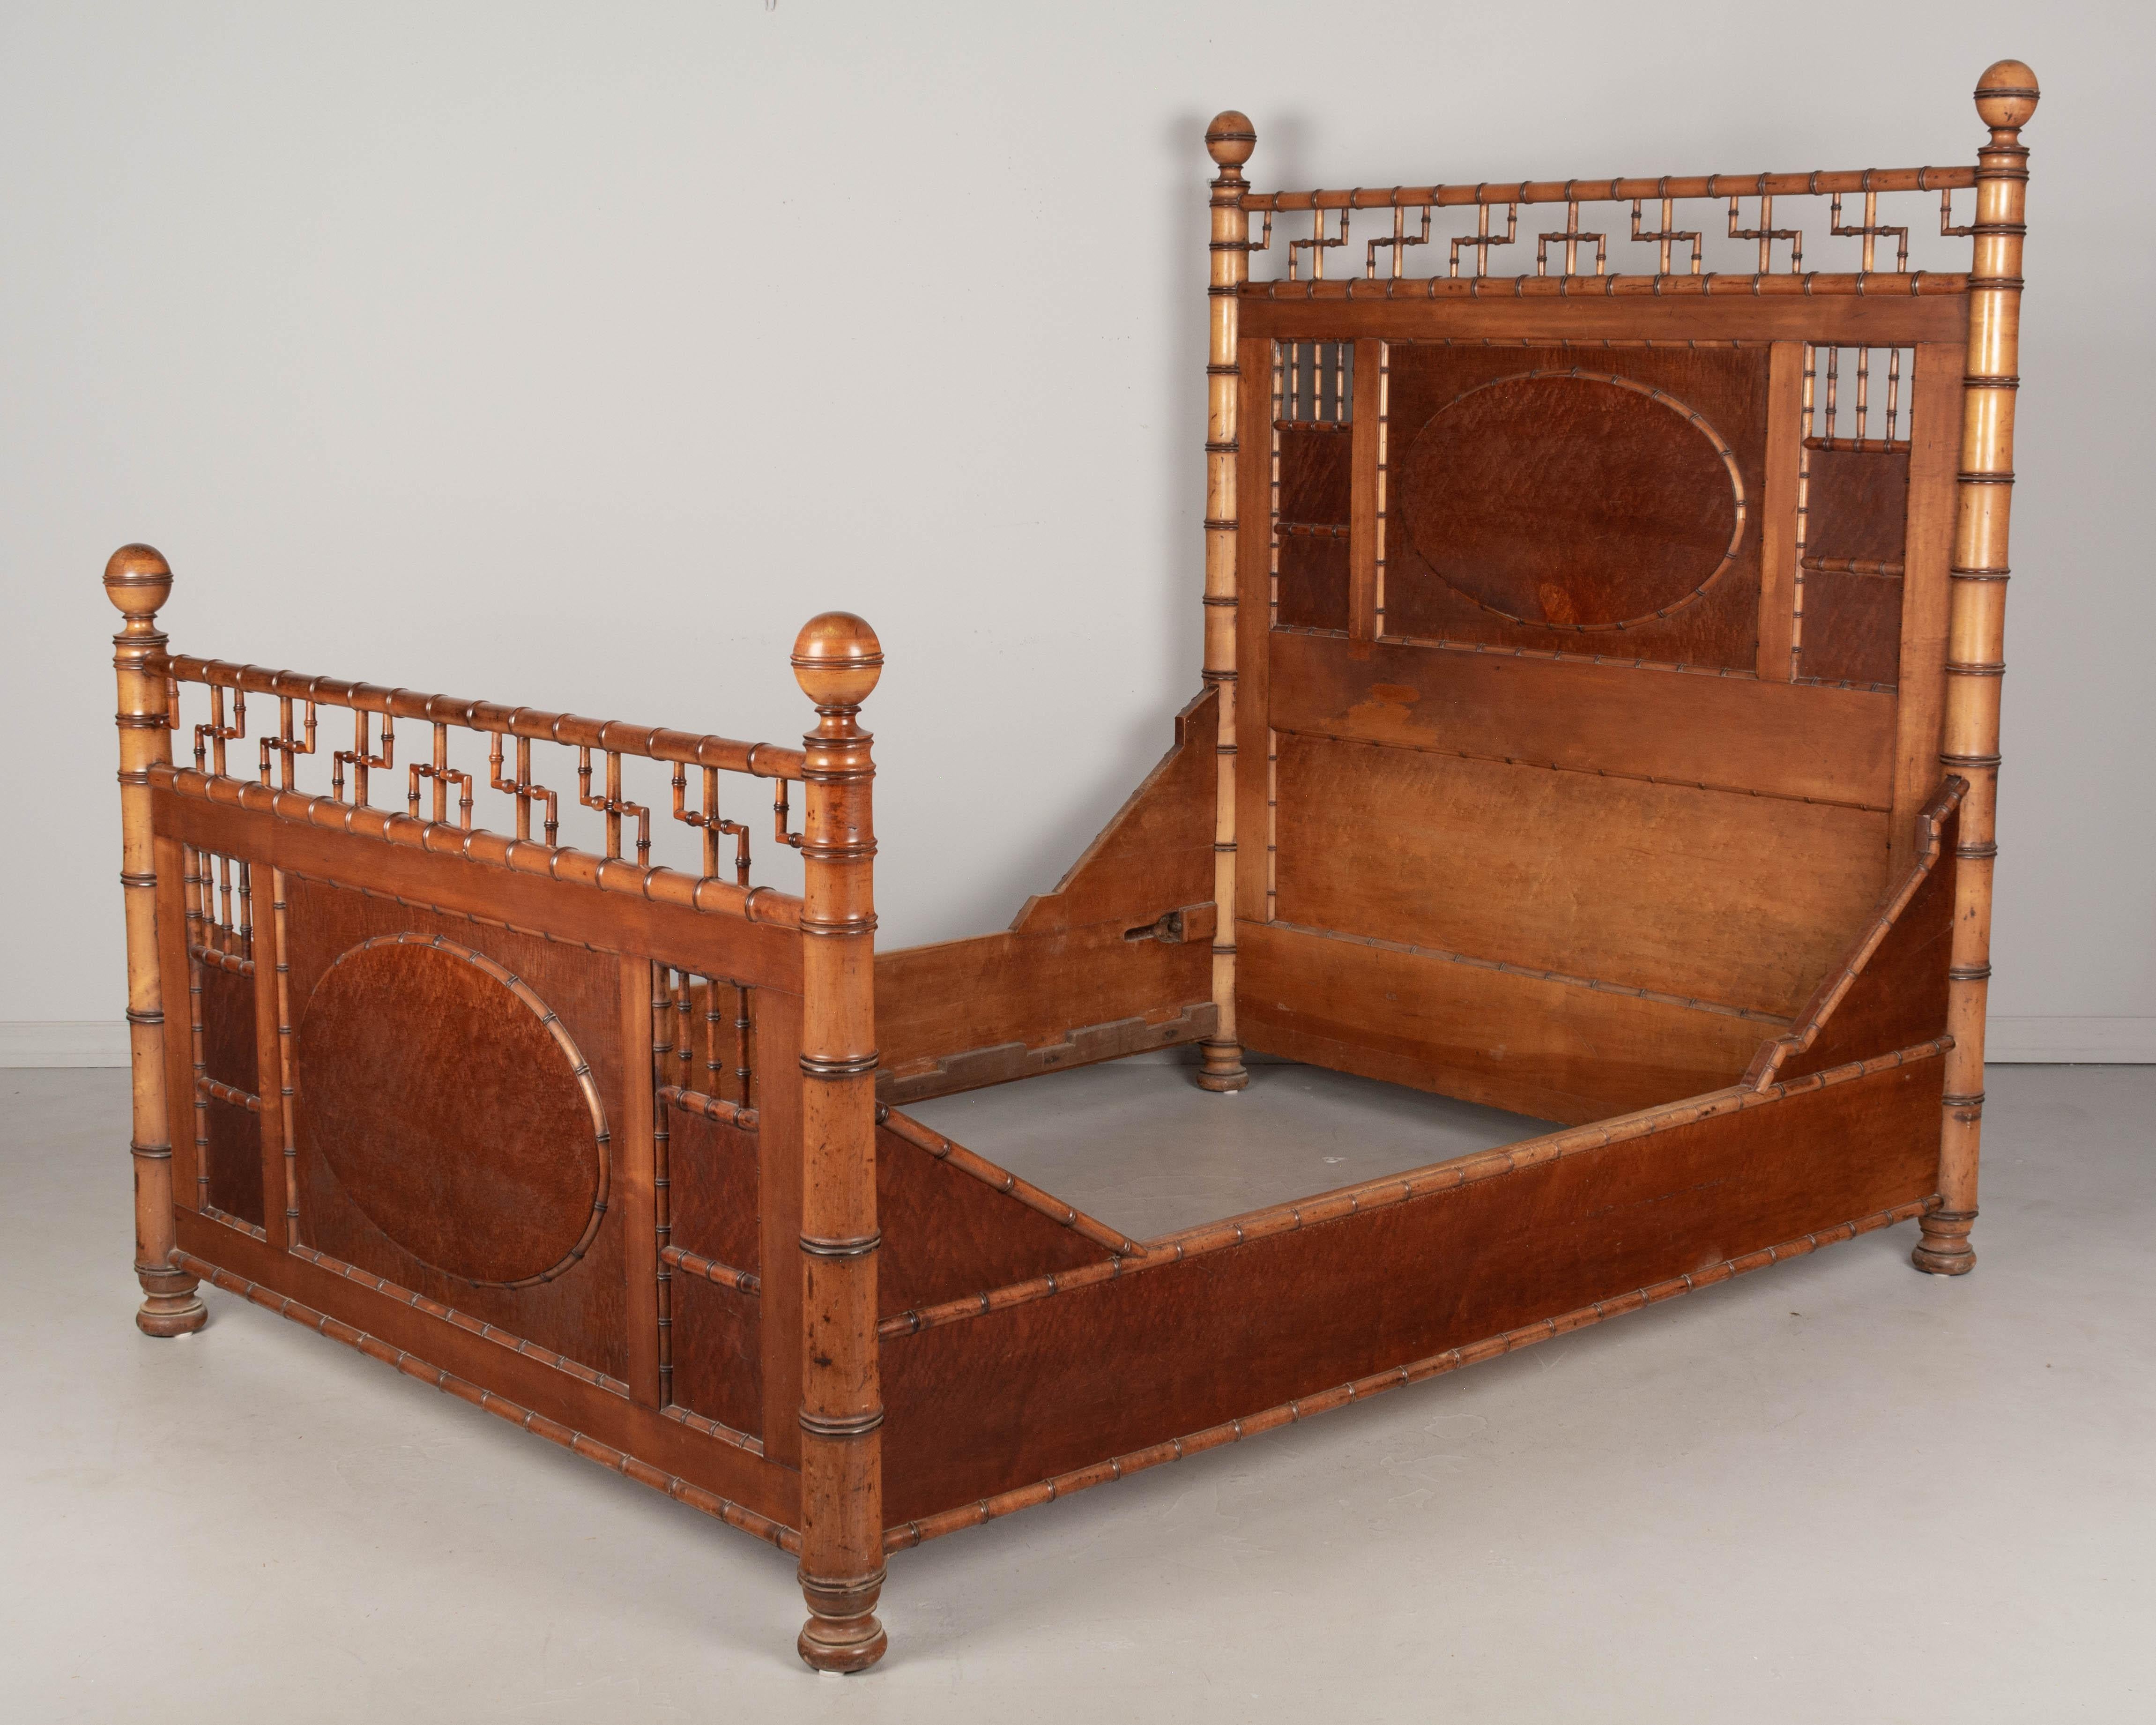 A 19th century American Victorian Aesthetic Movement faux bamboo bed frame by R. J. Horner & Co. made of solid cherry and birdseye maple. All original with amber stained finish and nice aged patina. This bed has a large oval paneled headboard and